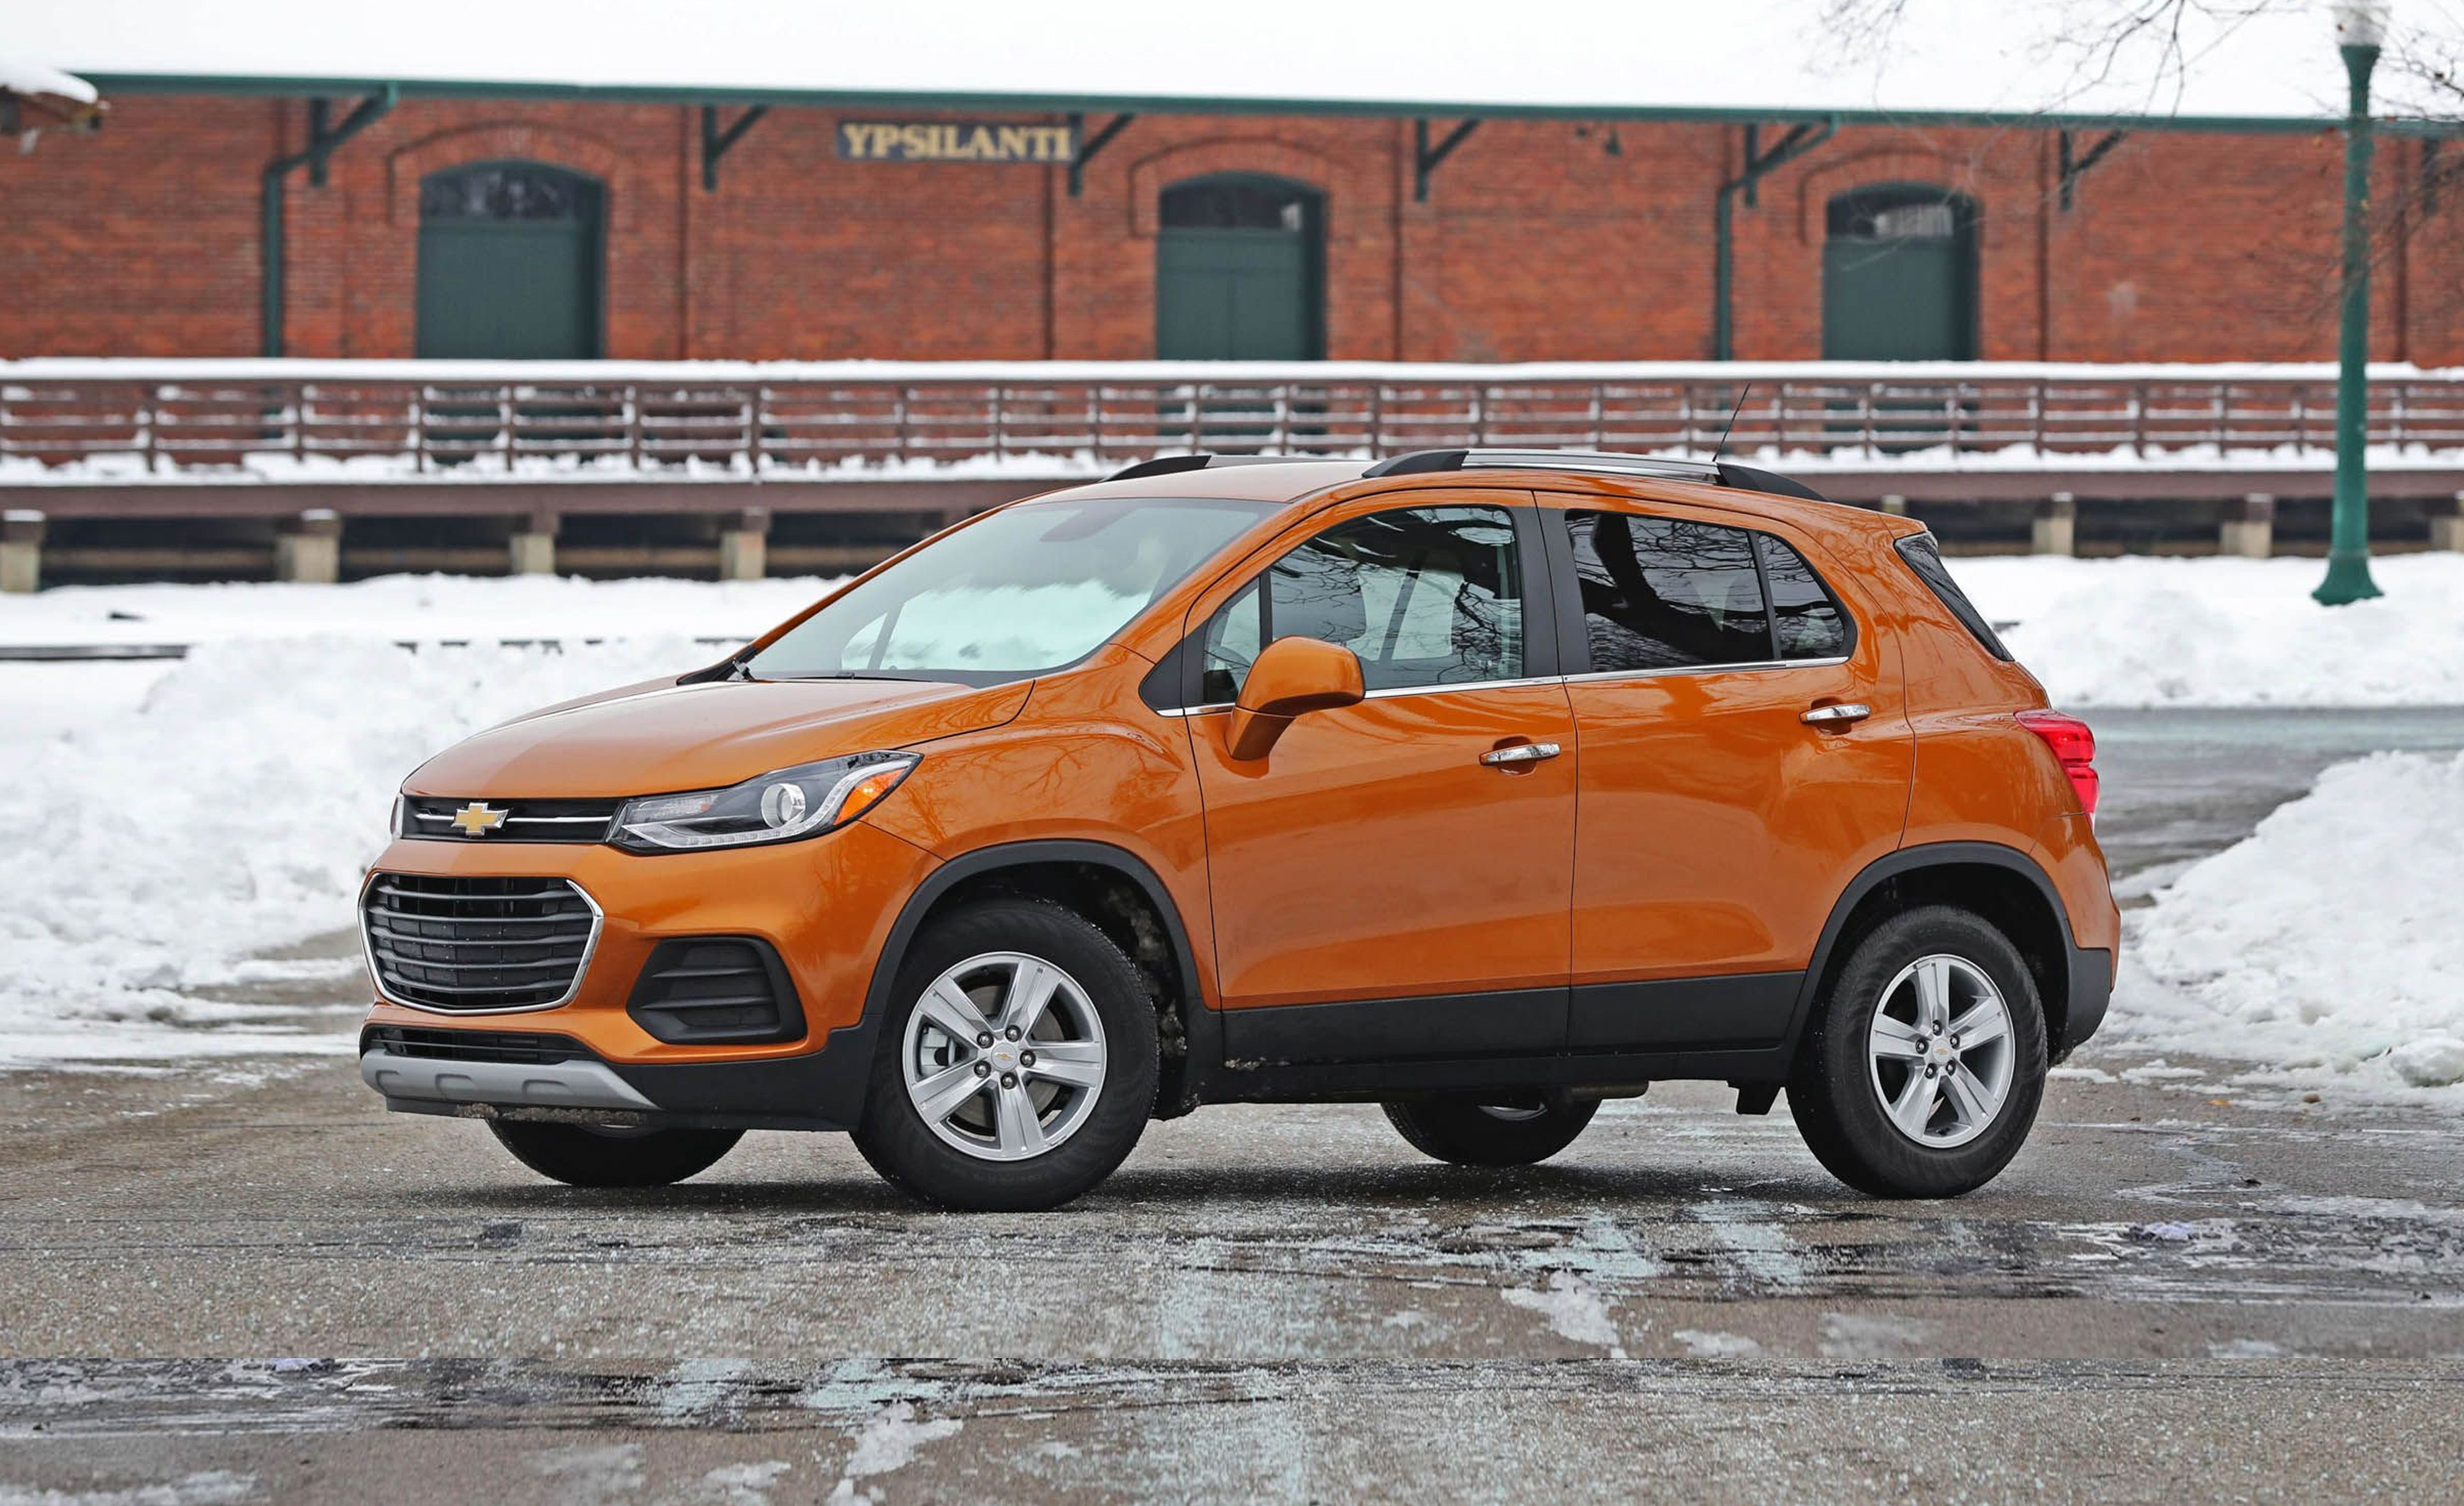 Chevrolet Trax (Tracker) exterior restyling